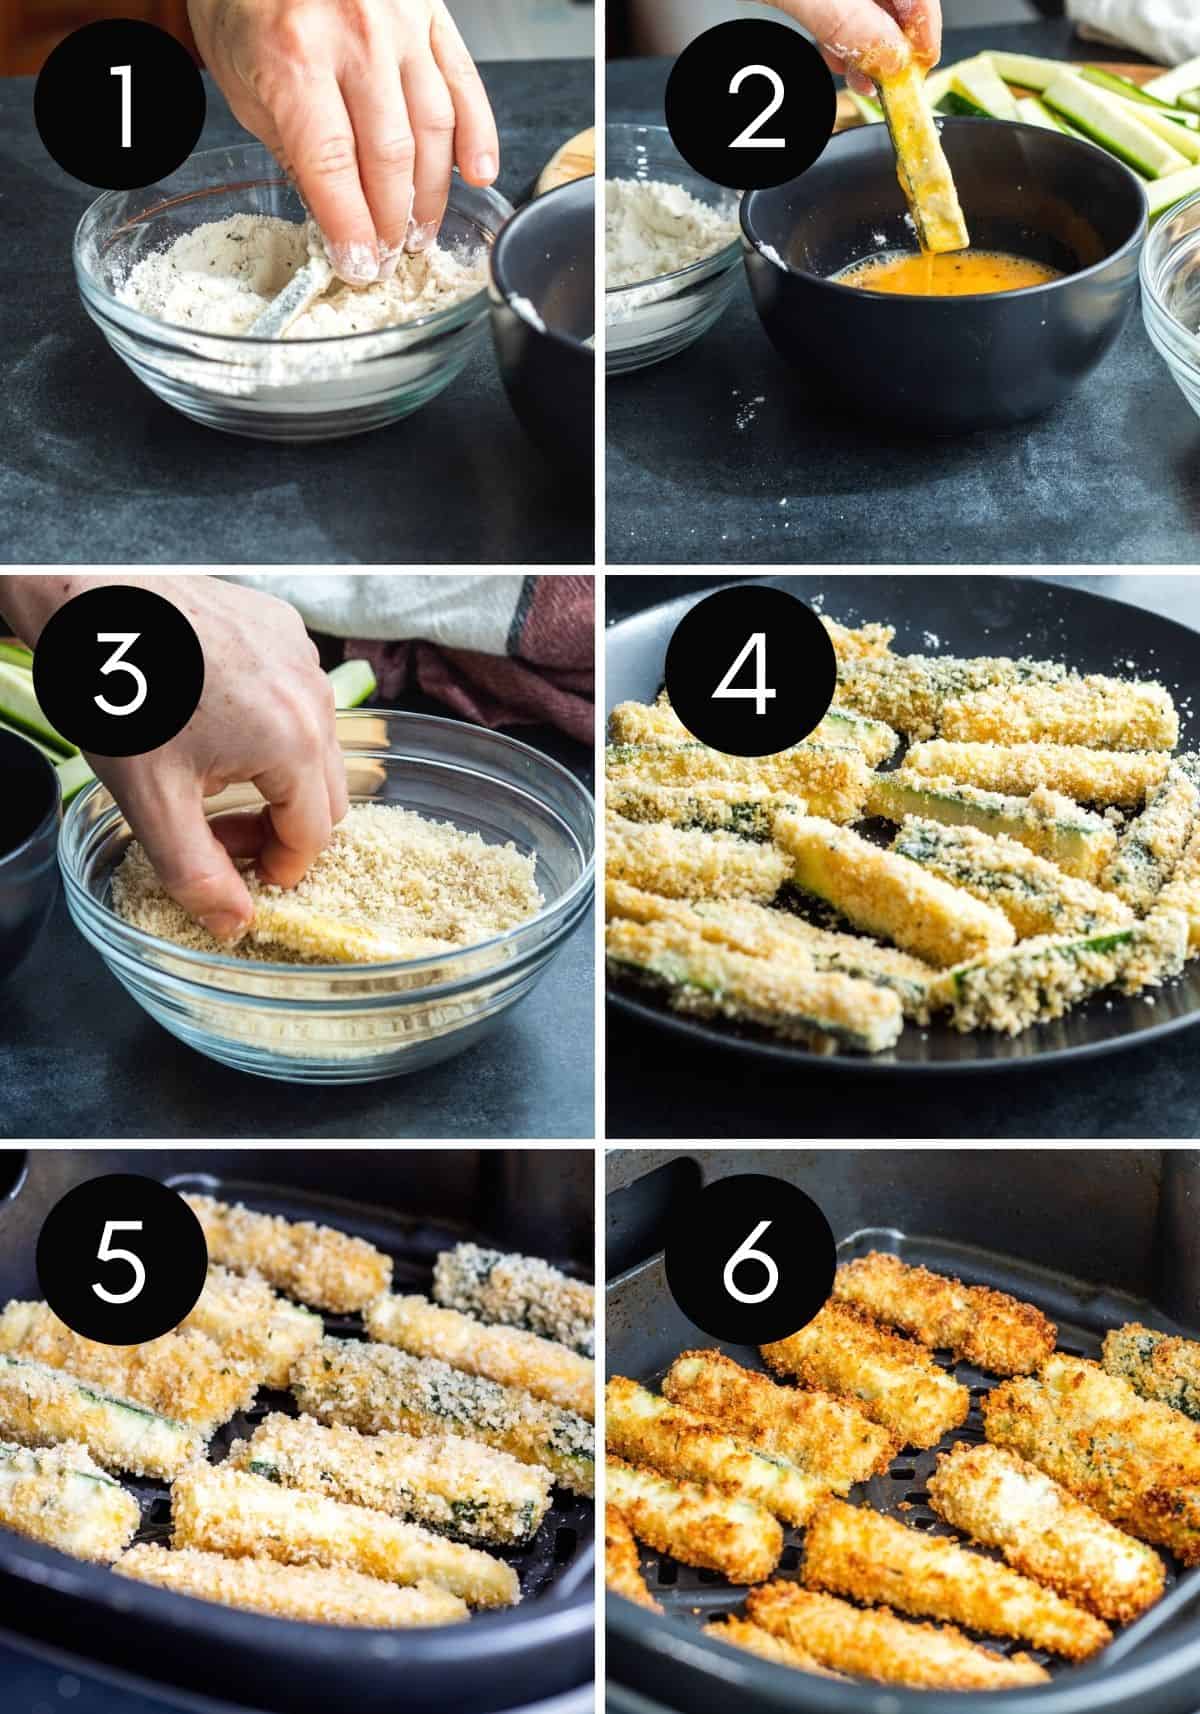 Six image prep collage showing zucchini fries being breaded then air fried.